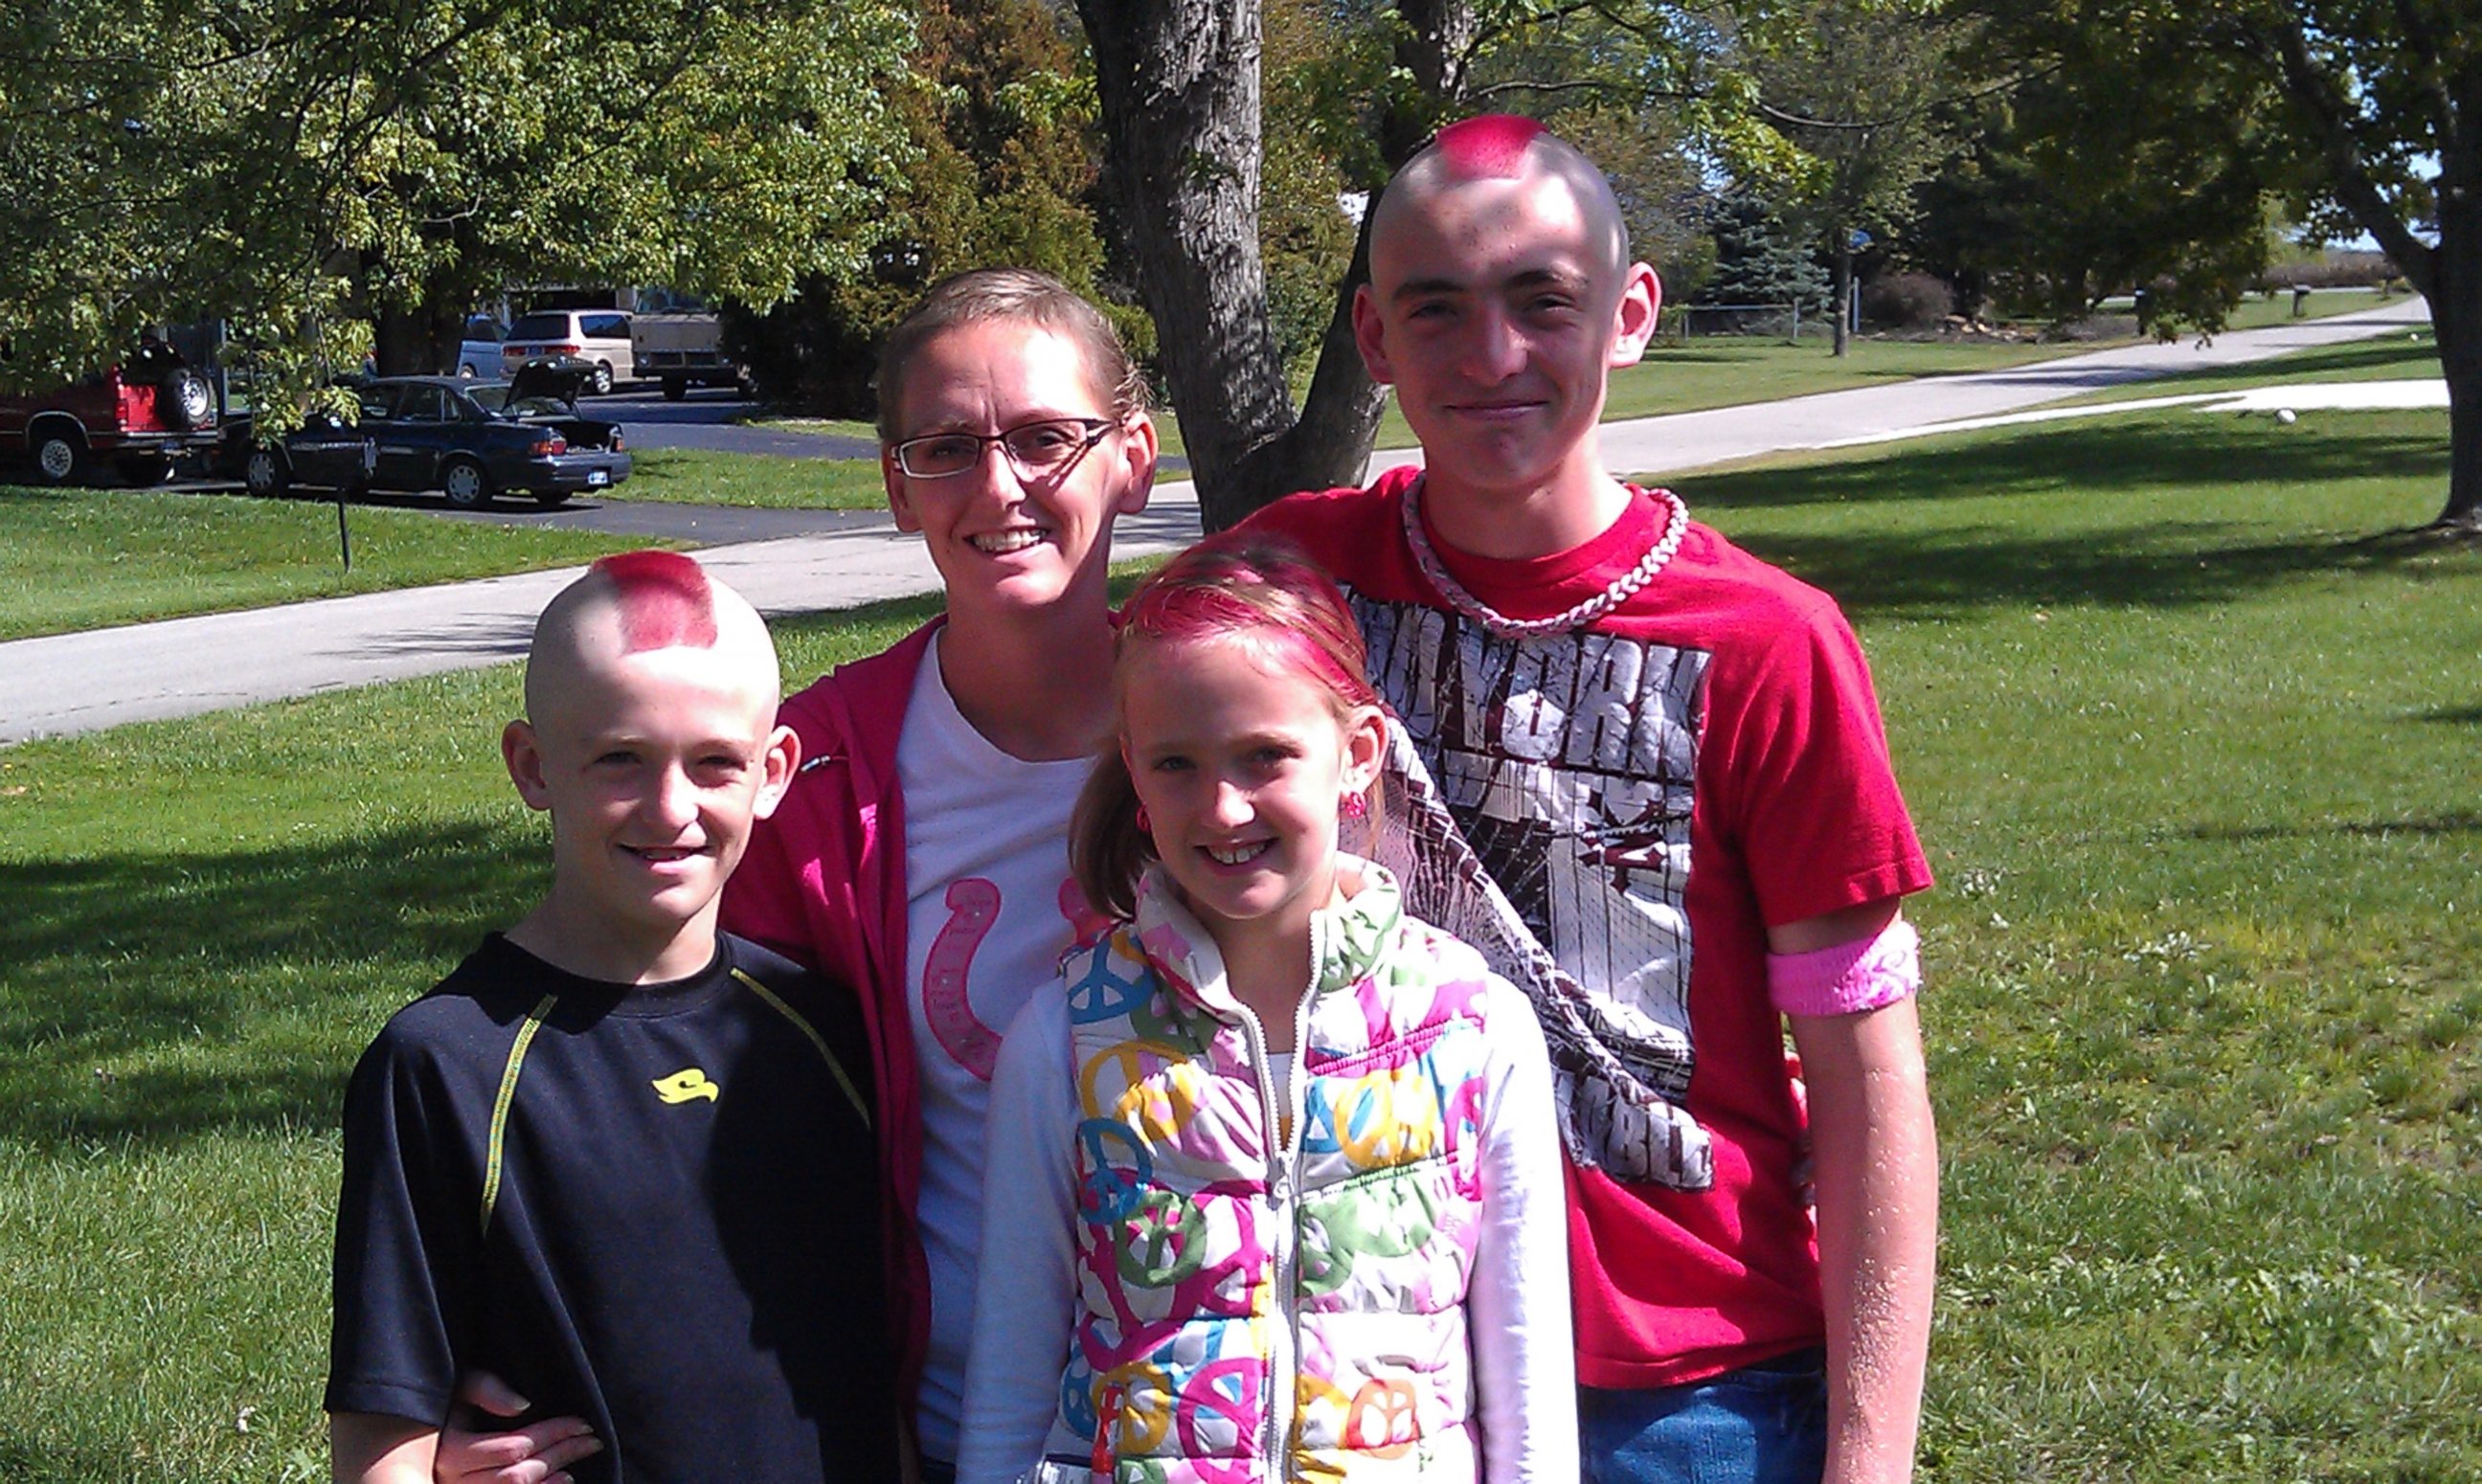 PHOTO: Stacey Foster, 33, with her children, from left to right, Trevor, 11, Jairis, 9 and Caleb, 14. All have dyed their hair pink in support of their mother.